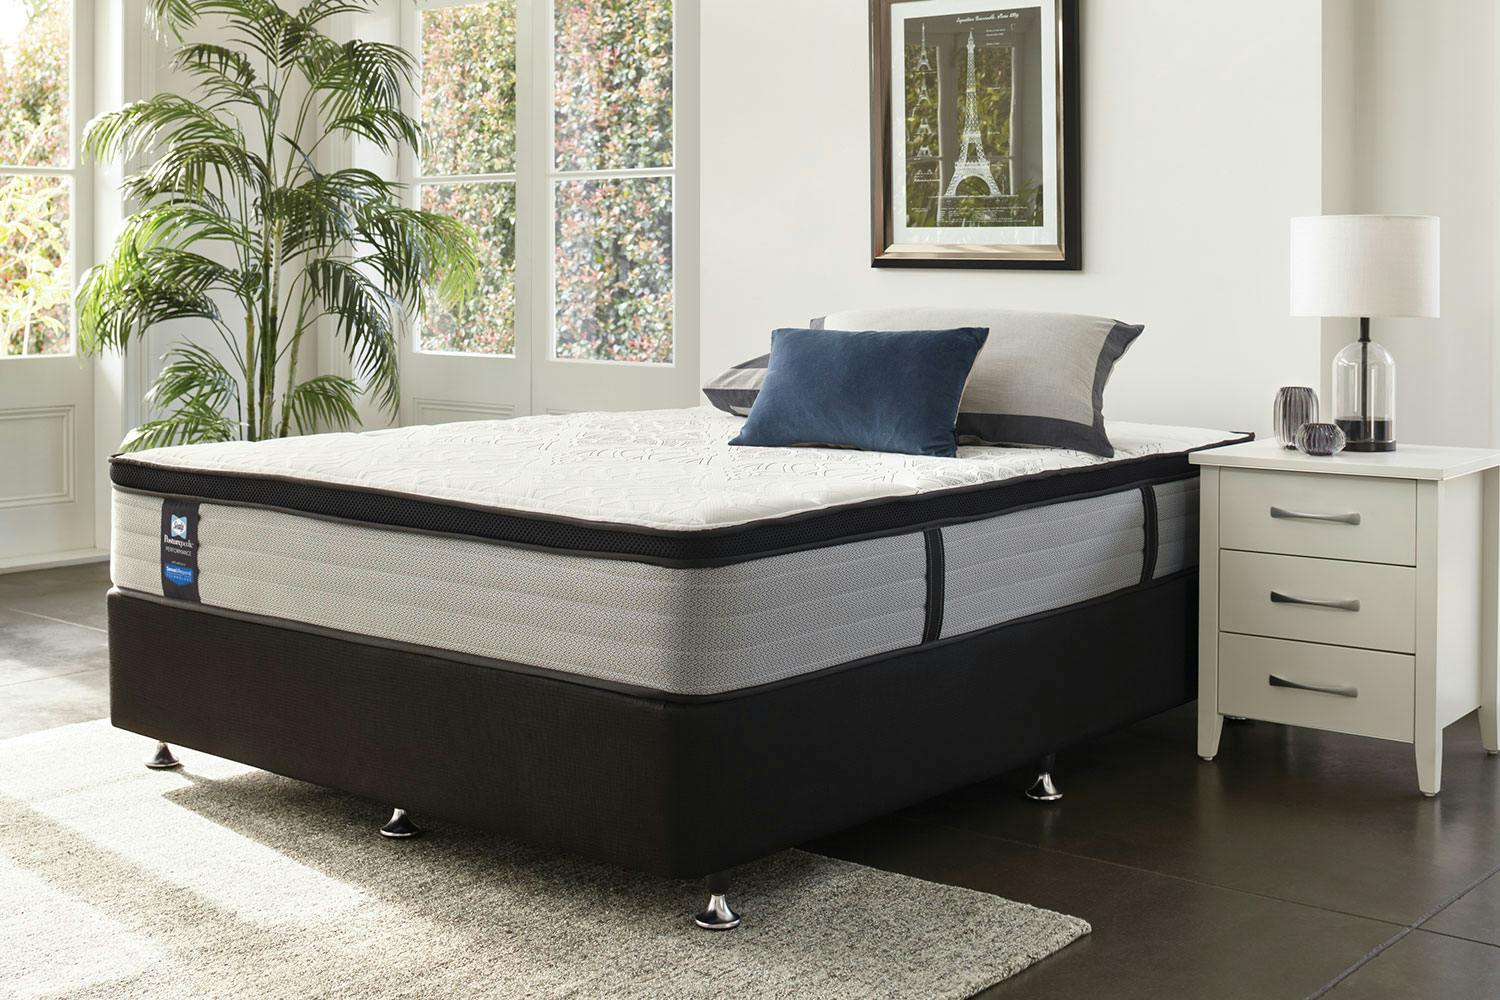 Mason Firm King Single Bed By Sealy Posturepedic